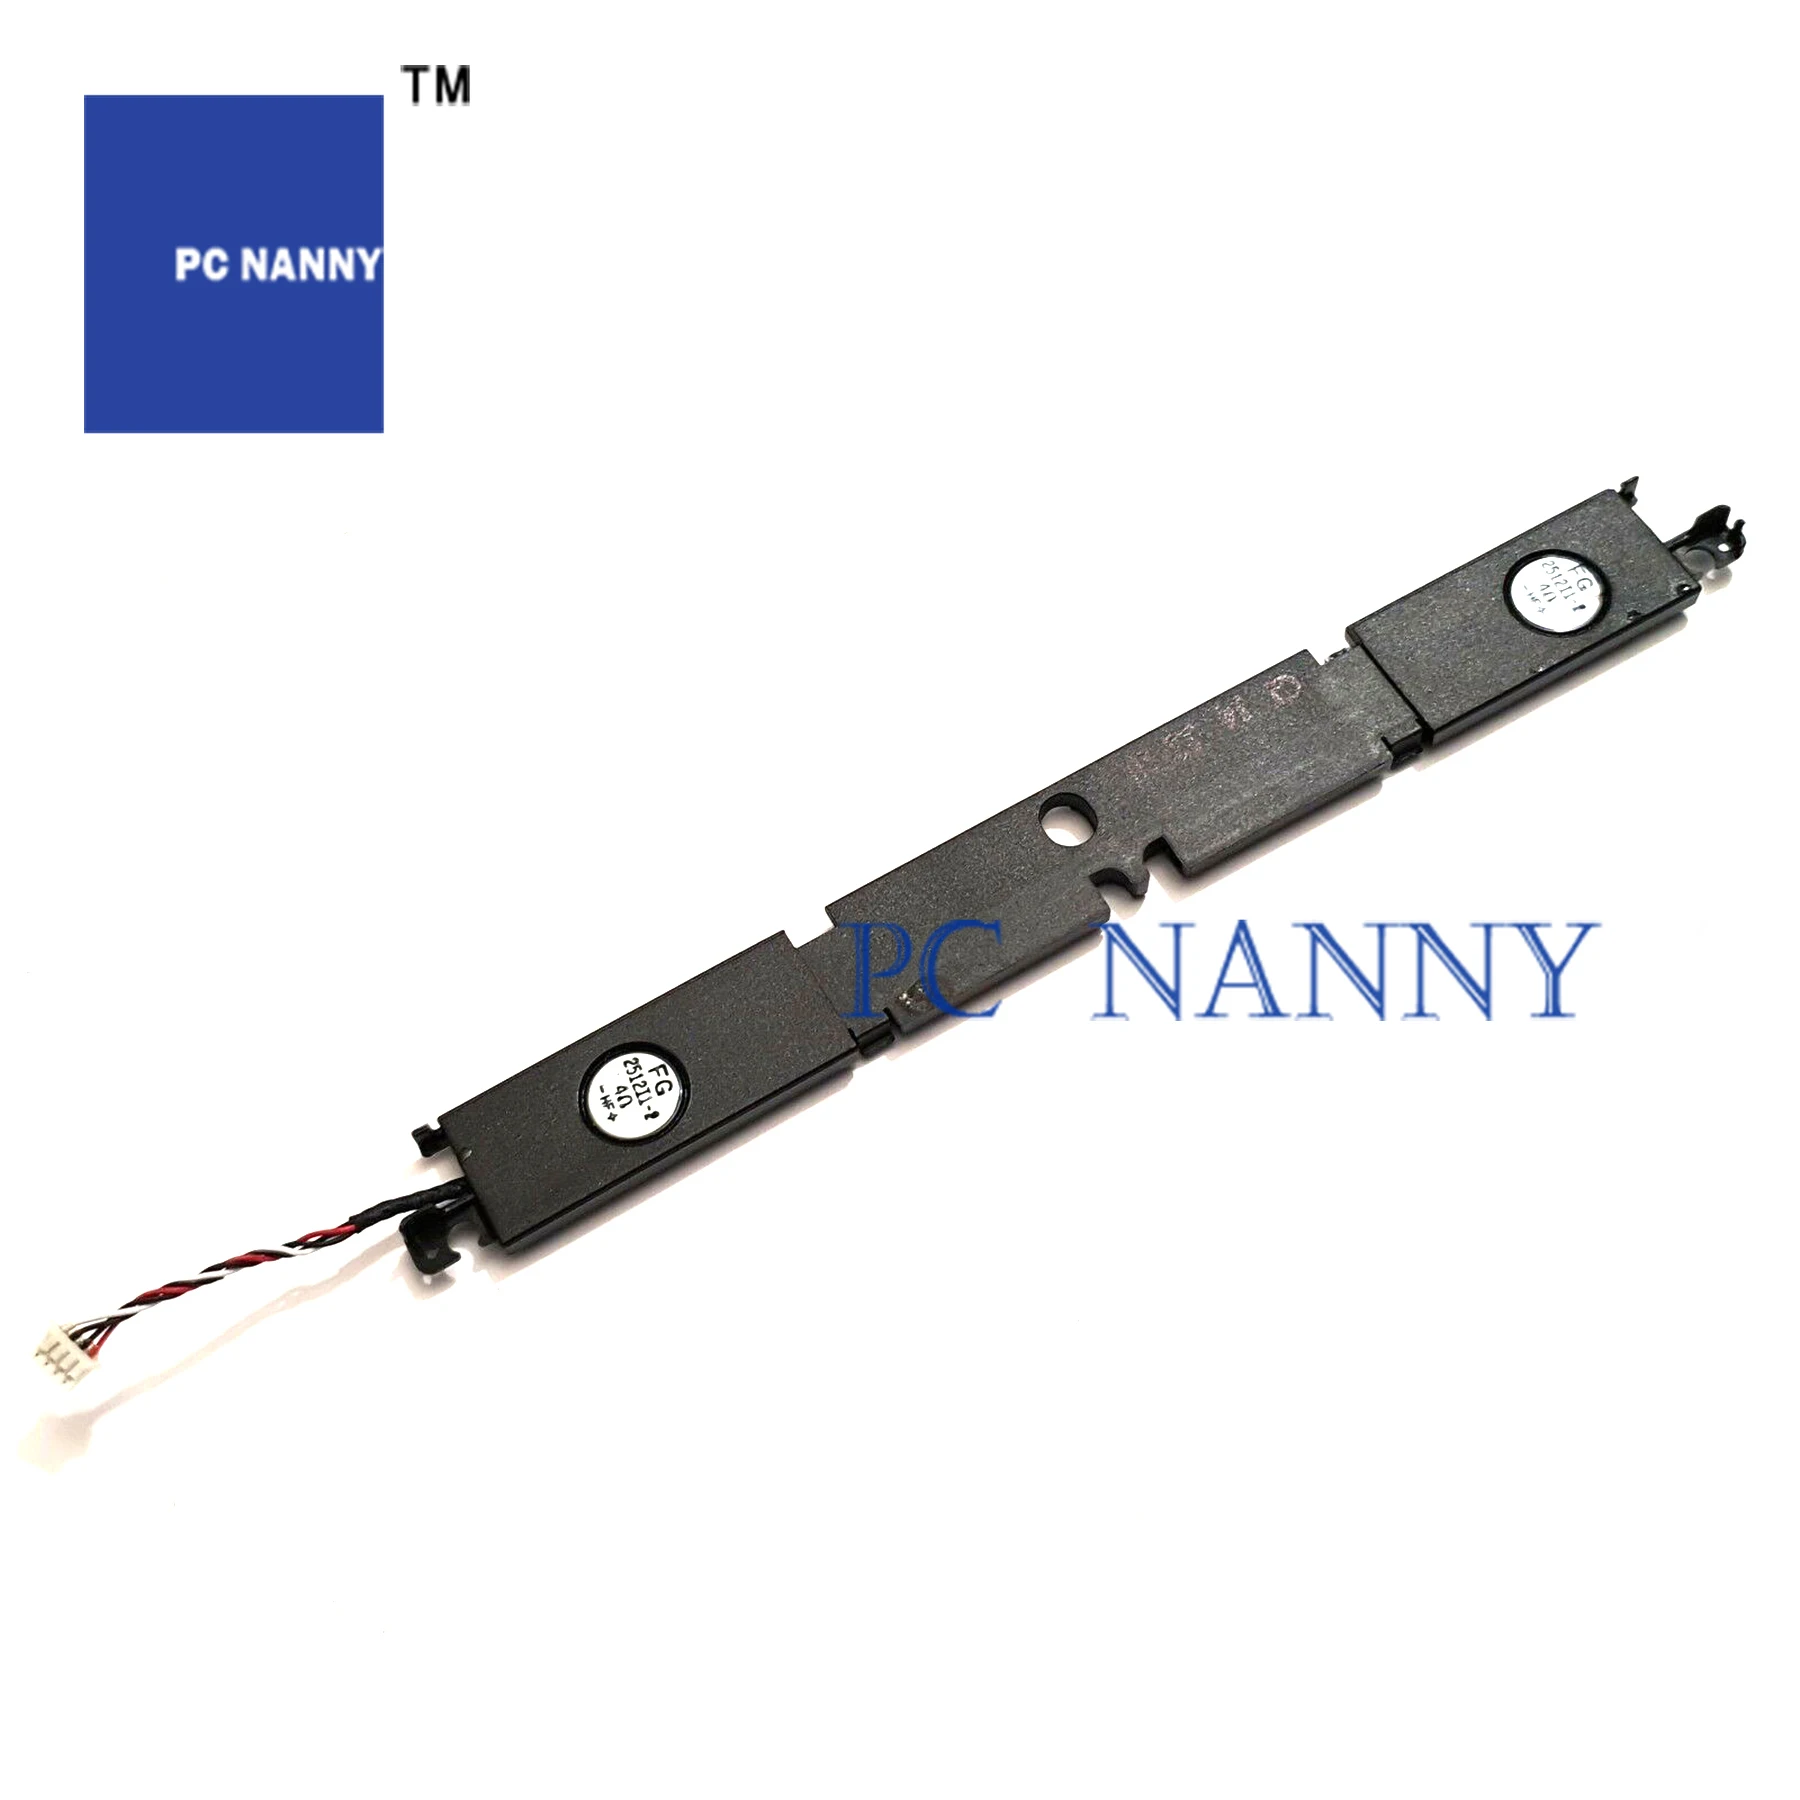 

PCNANNY FORHP Elitebook 820 G1 G2 725 G1 G2 730555-001 Speaker touchpad HDD Caddy Power Board 6050A2560601